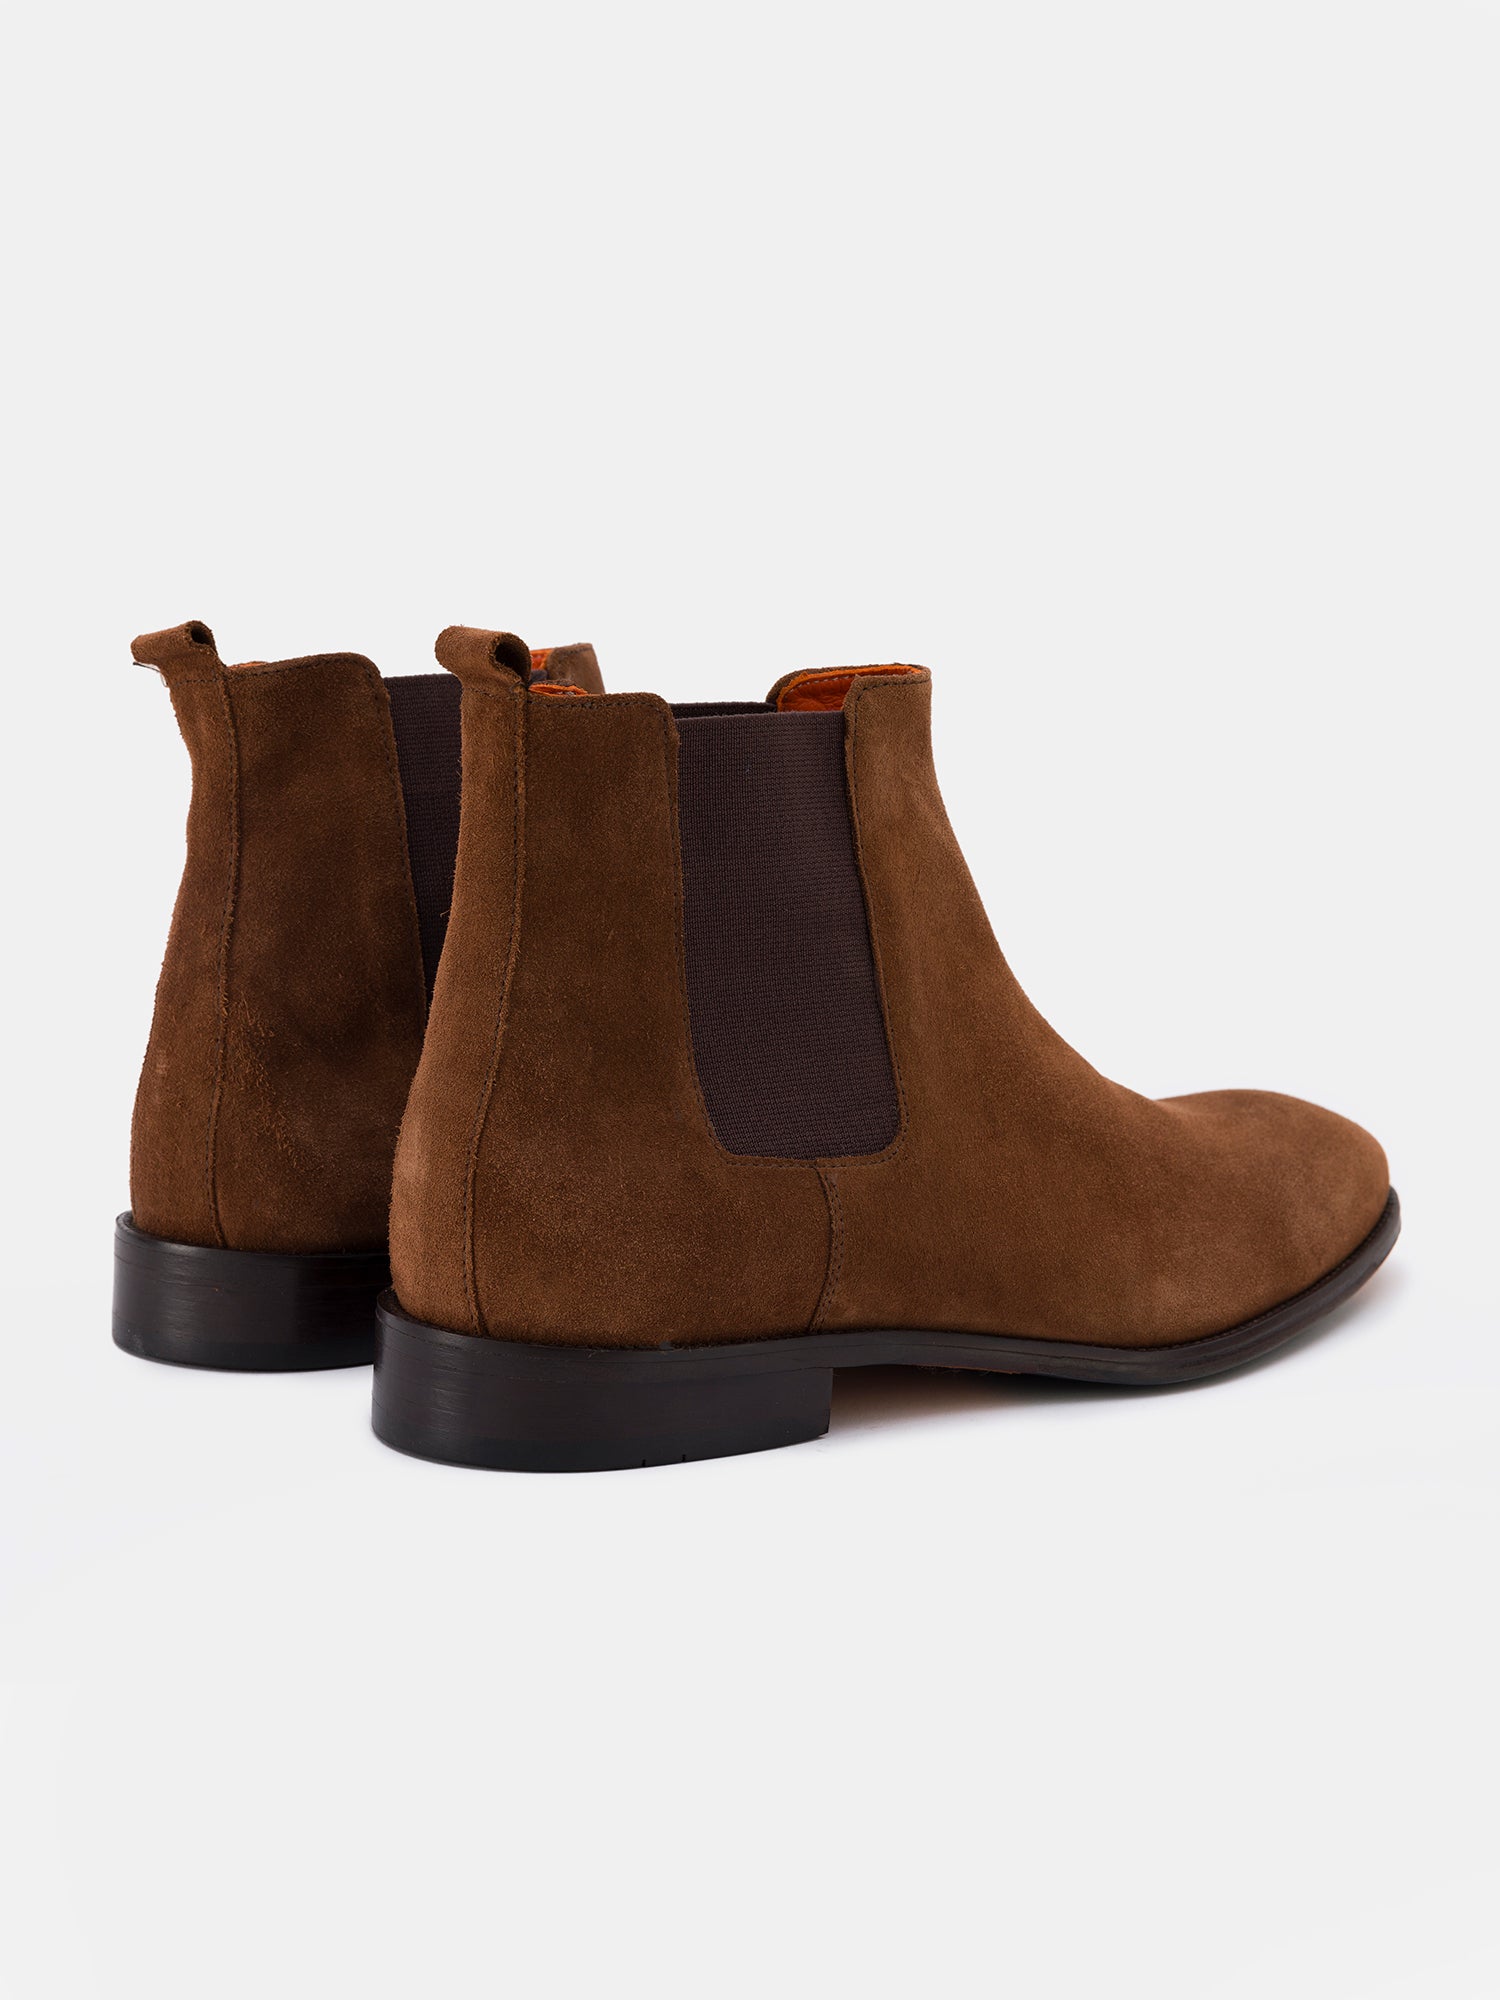 Brown Suede Chelsea Boots